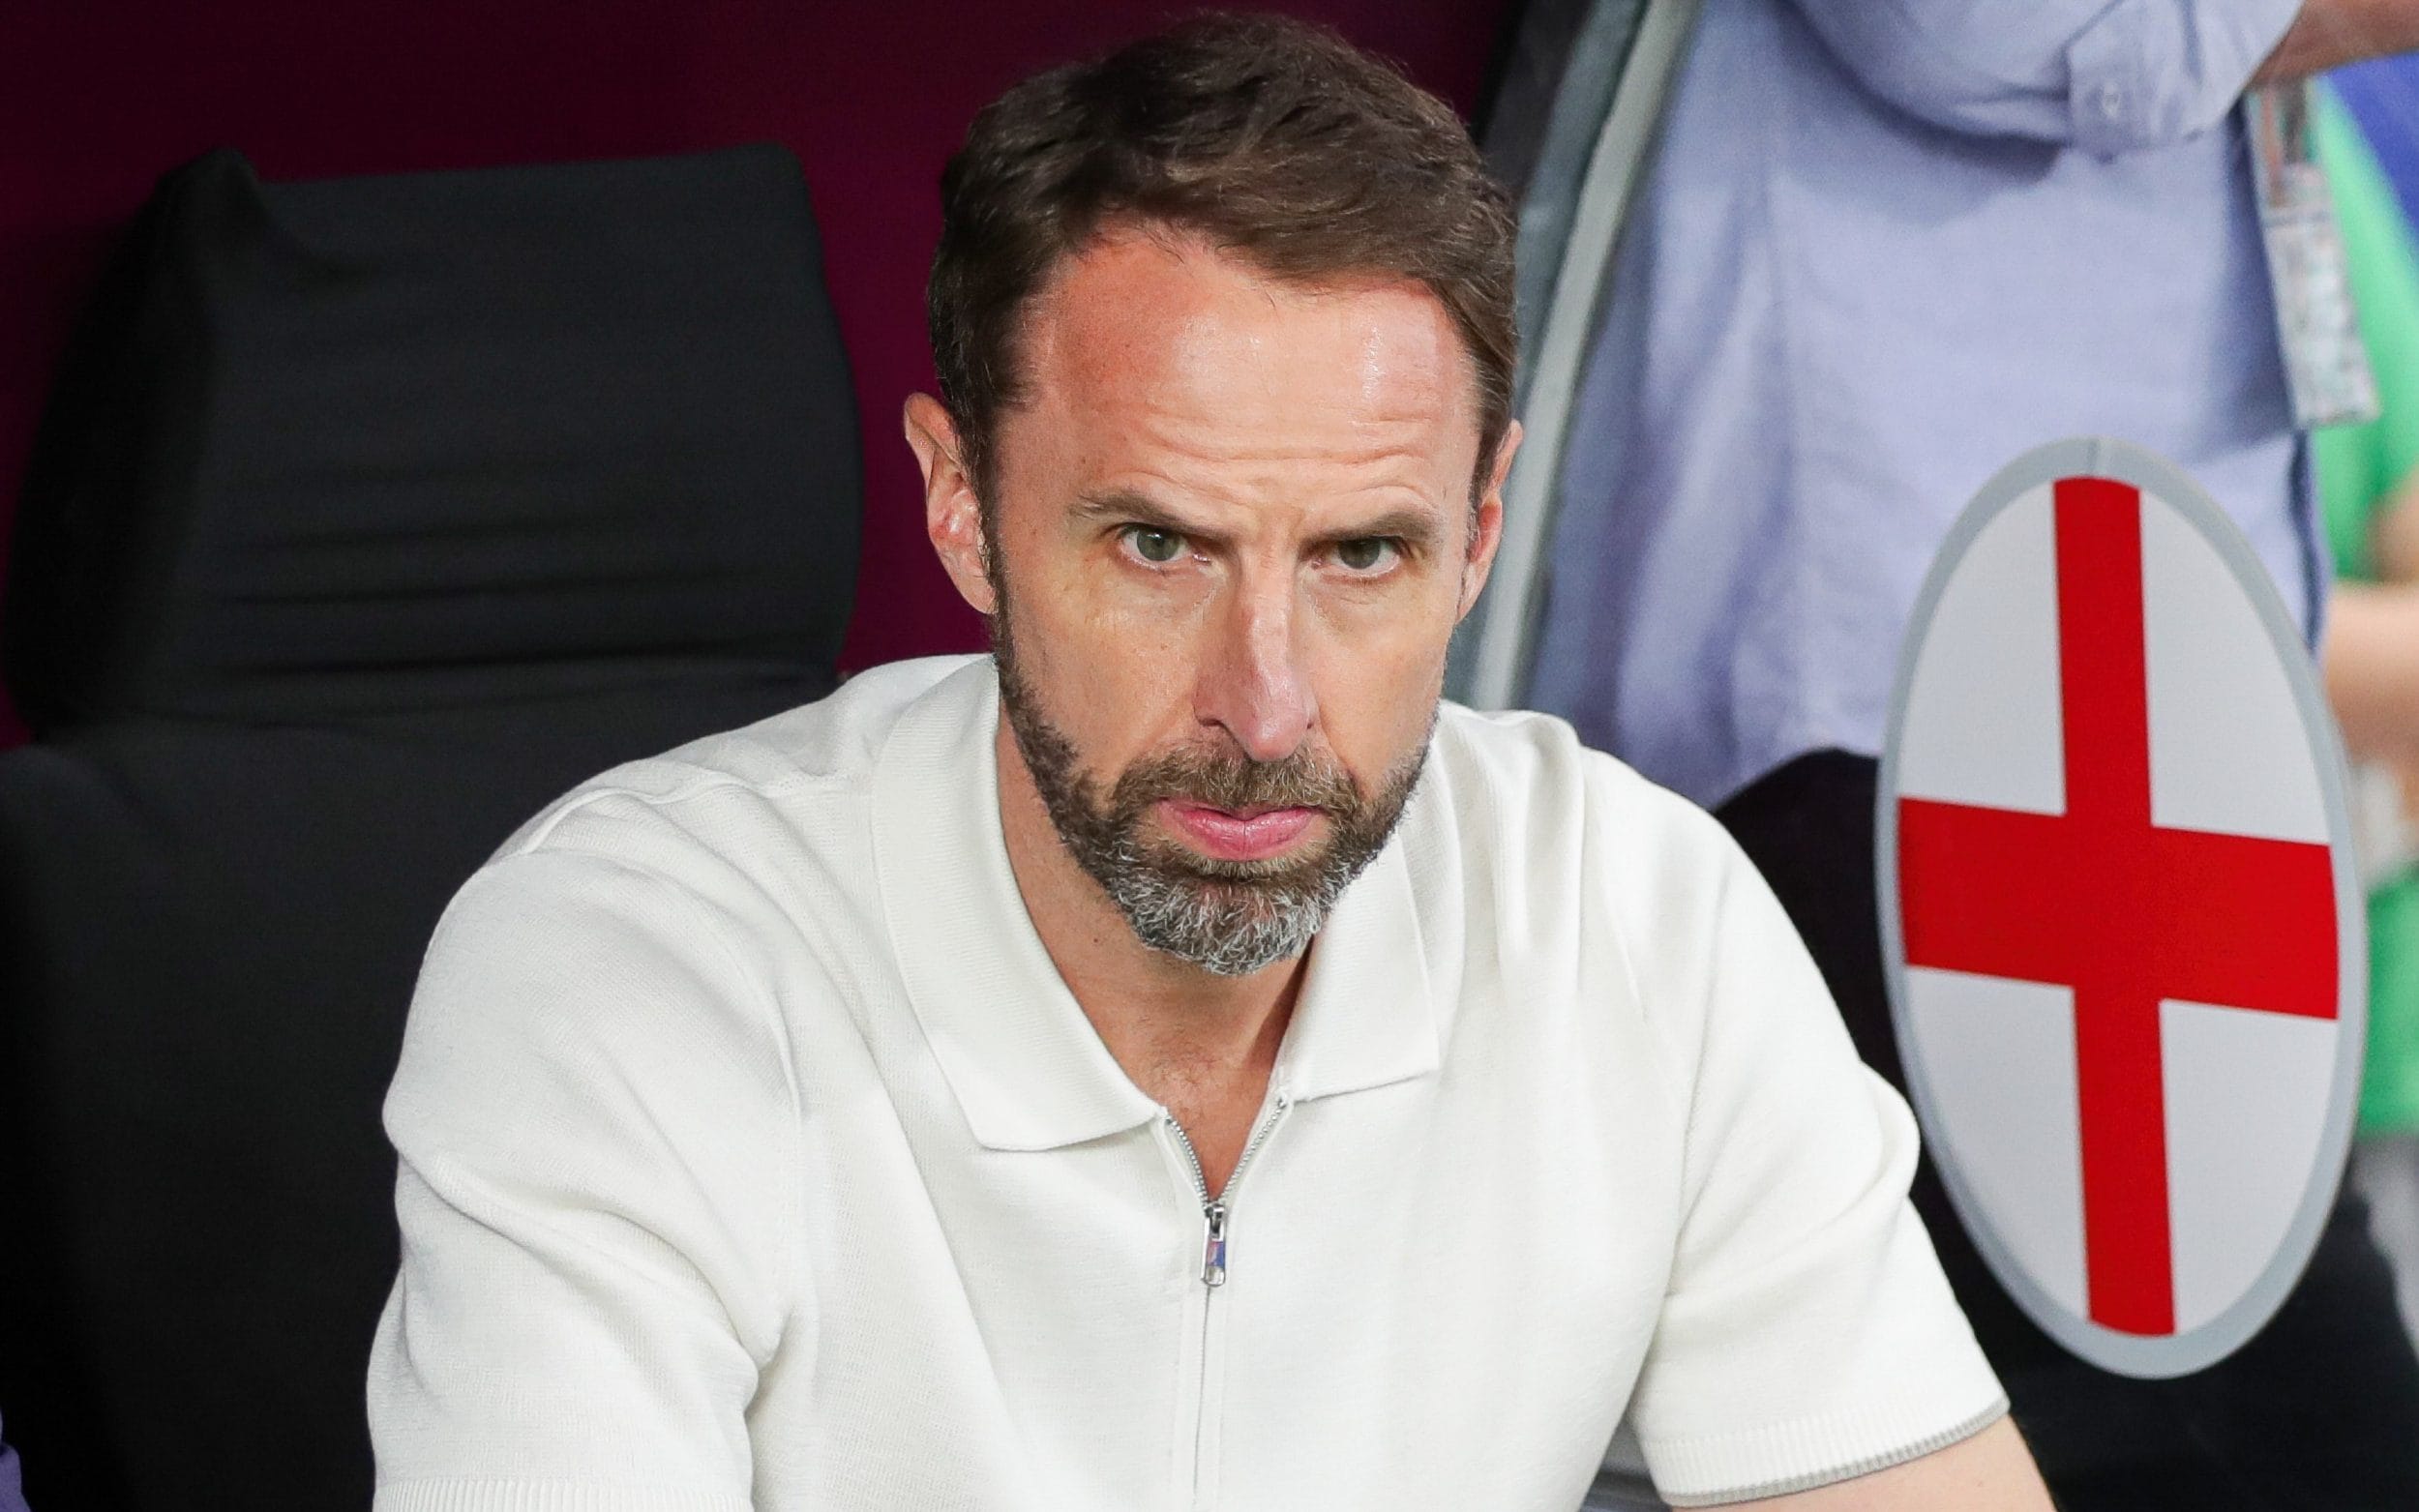 Gareth Southgate made playing for England fun again – and now it is all coming undone